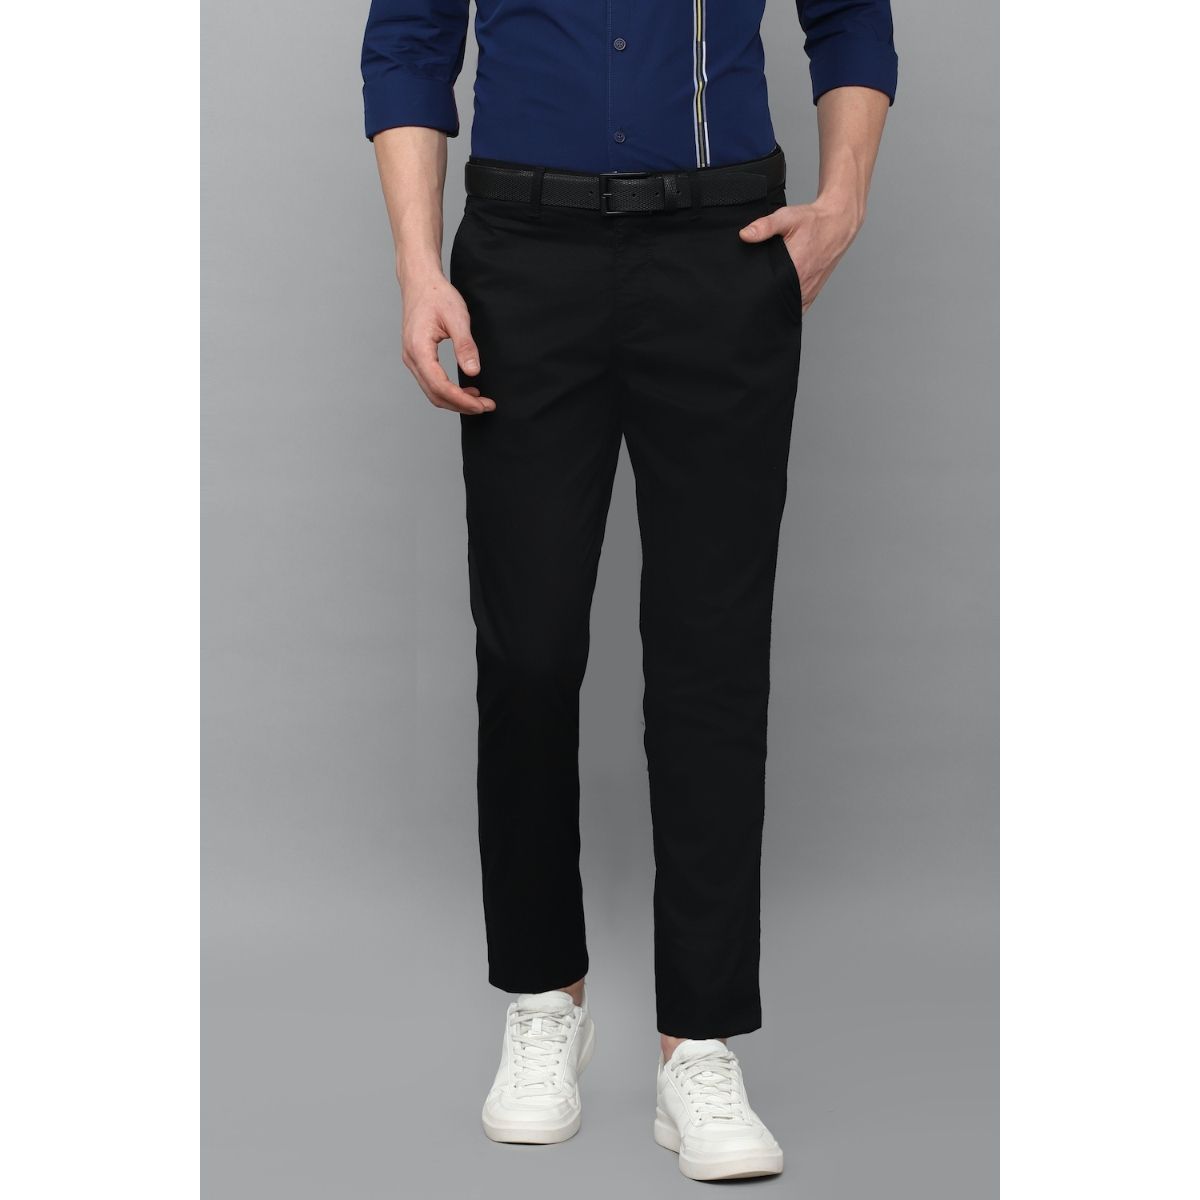 Buy Cream Trousers  Pants for Men by LOUIS PHILIPPE Online  Ajiocom